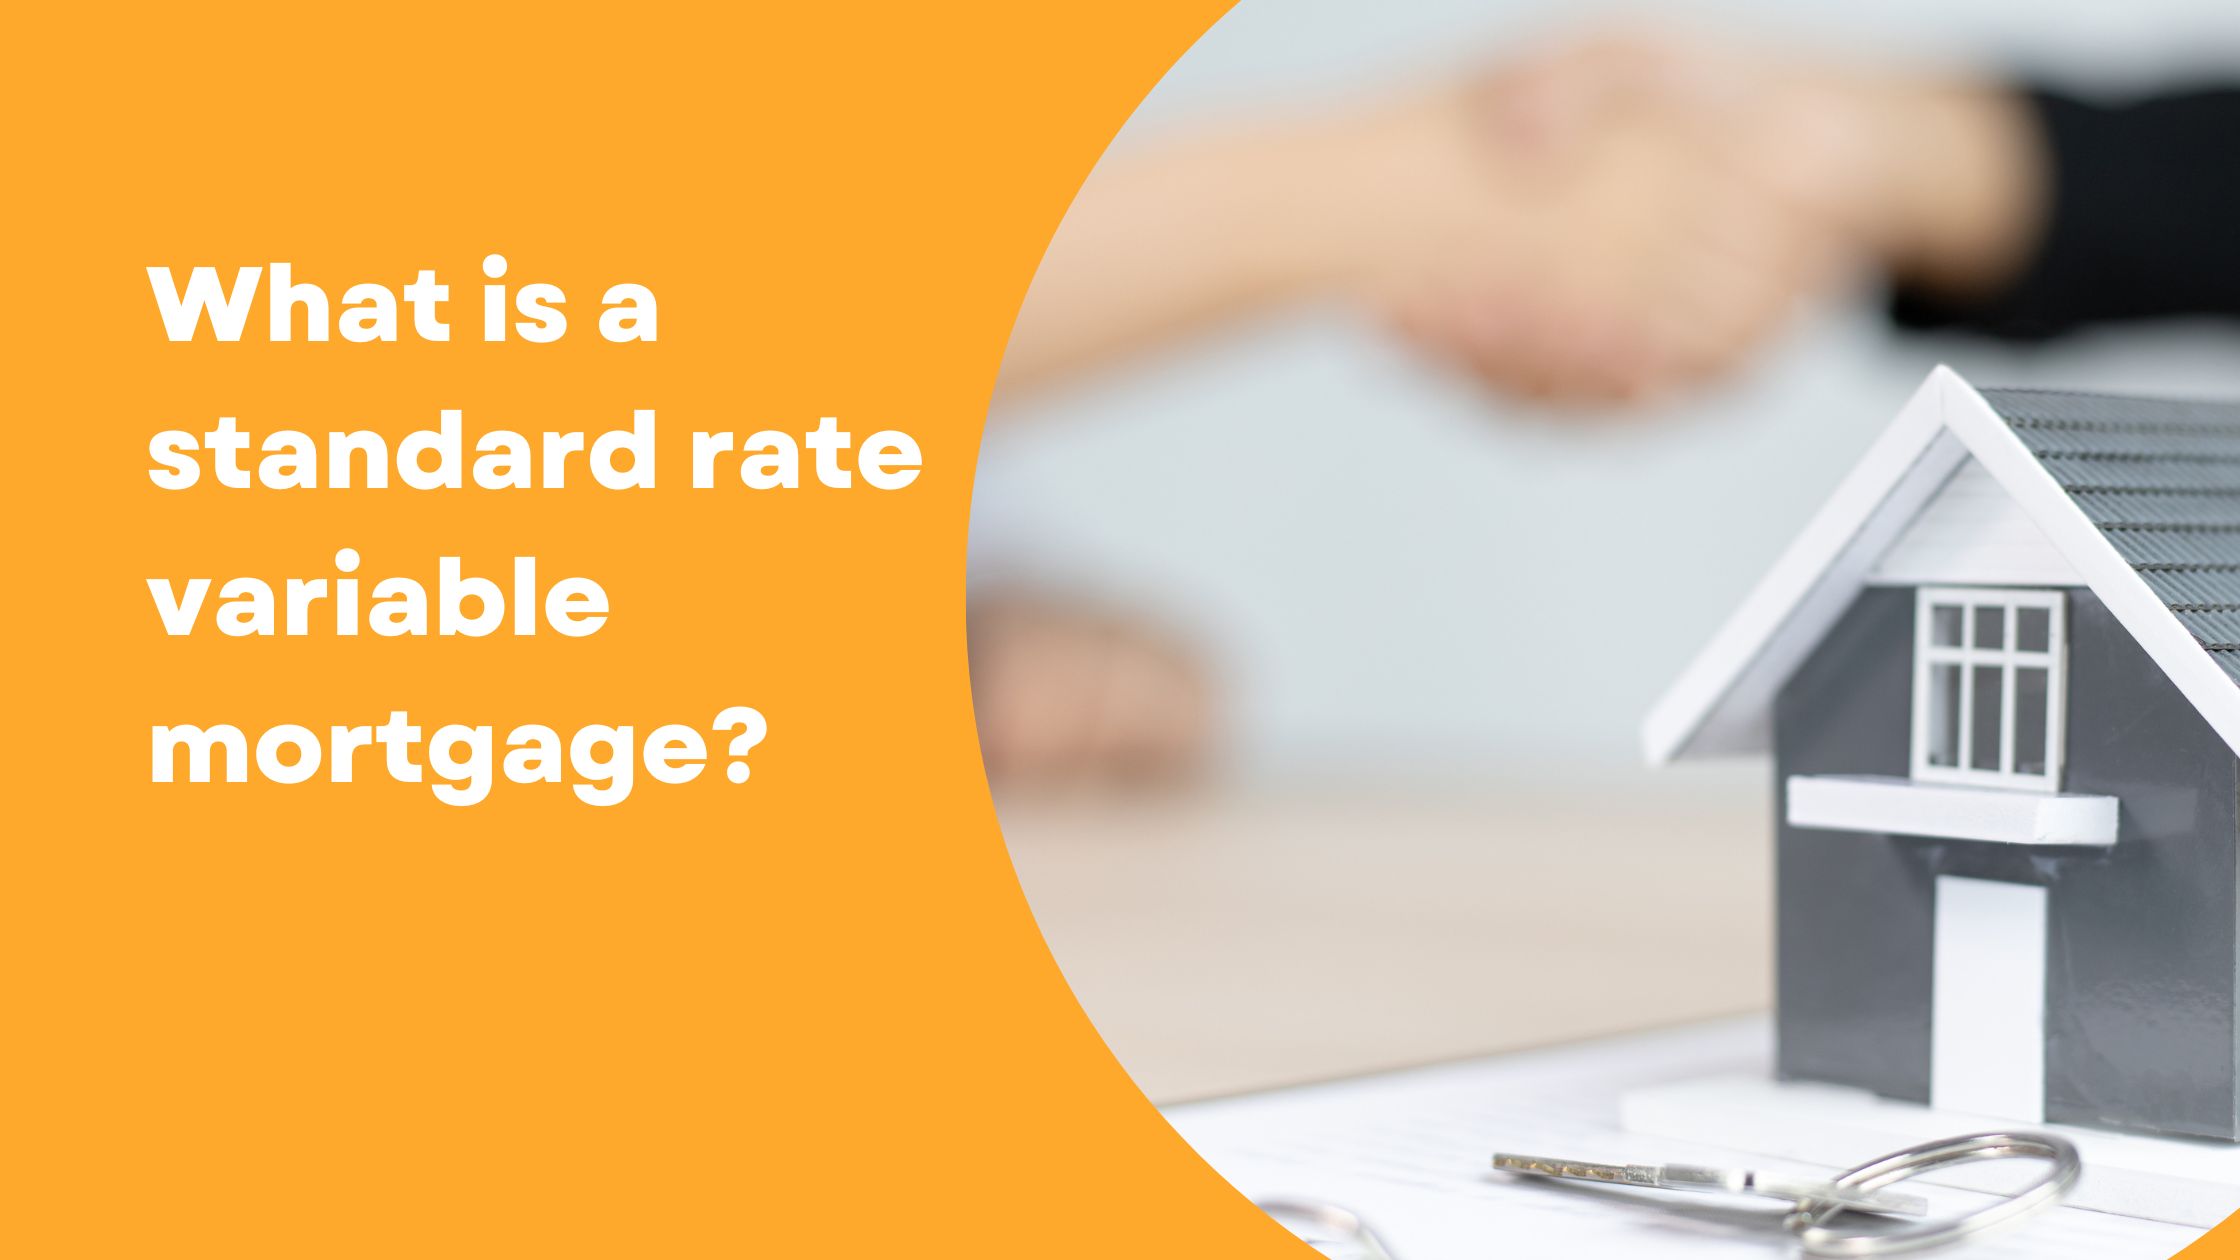 What is a standard variable rate mortgage?